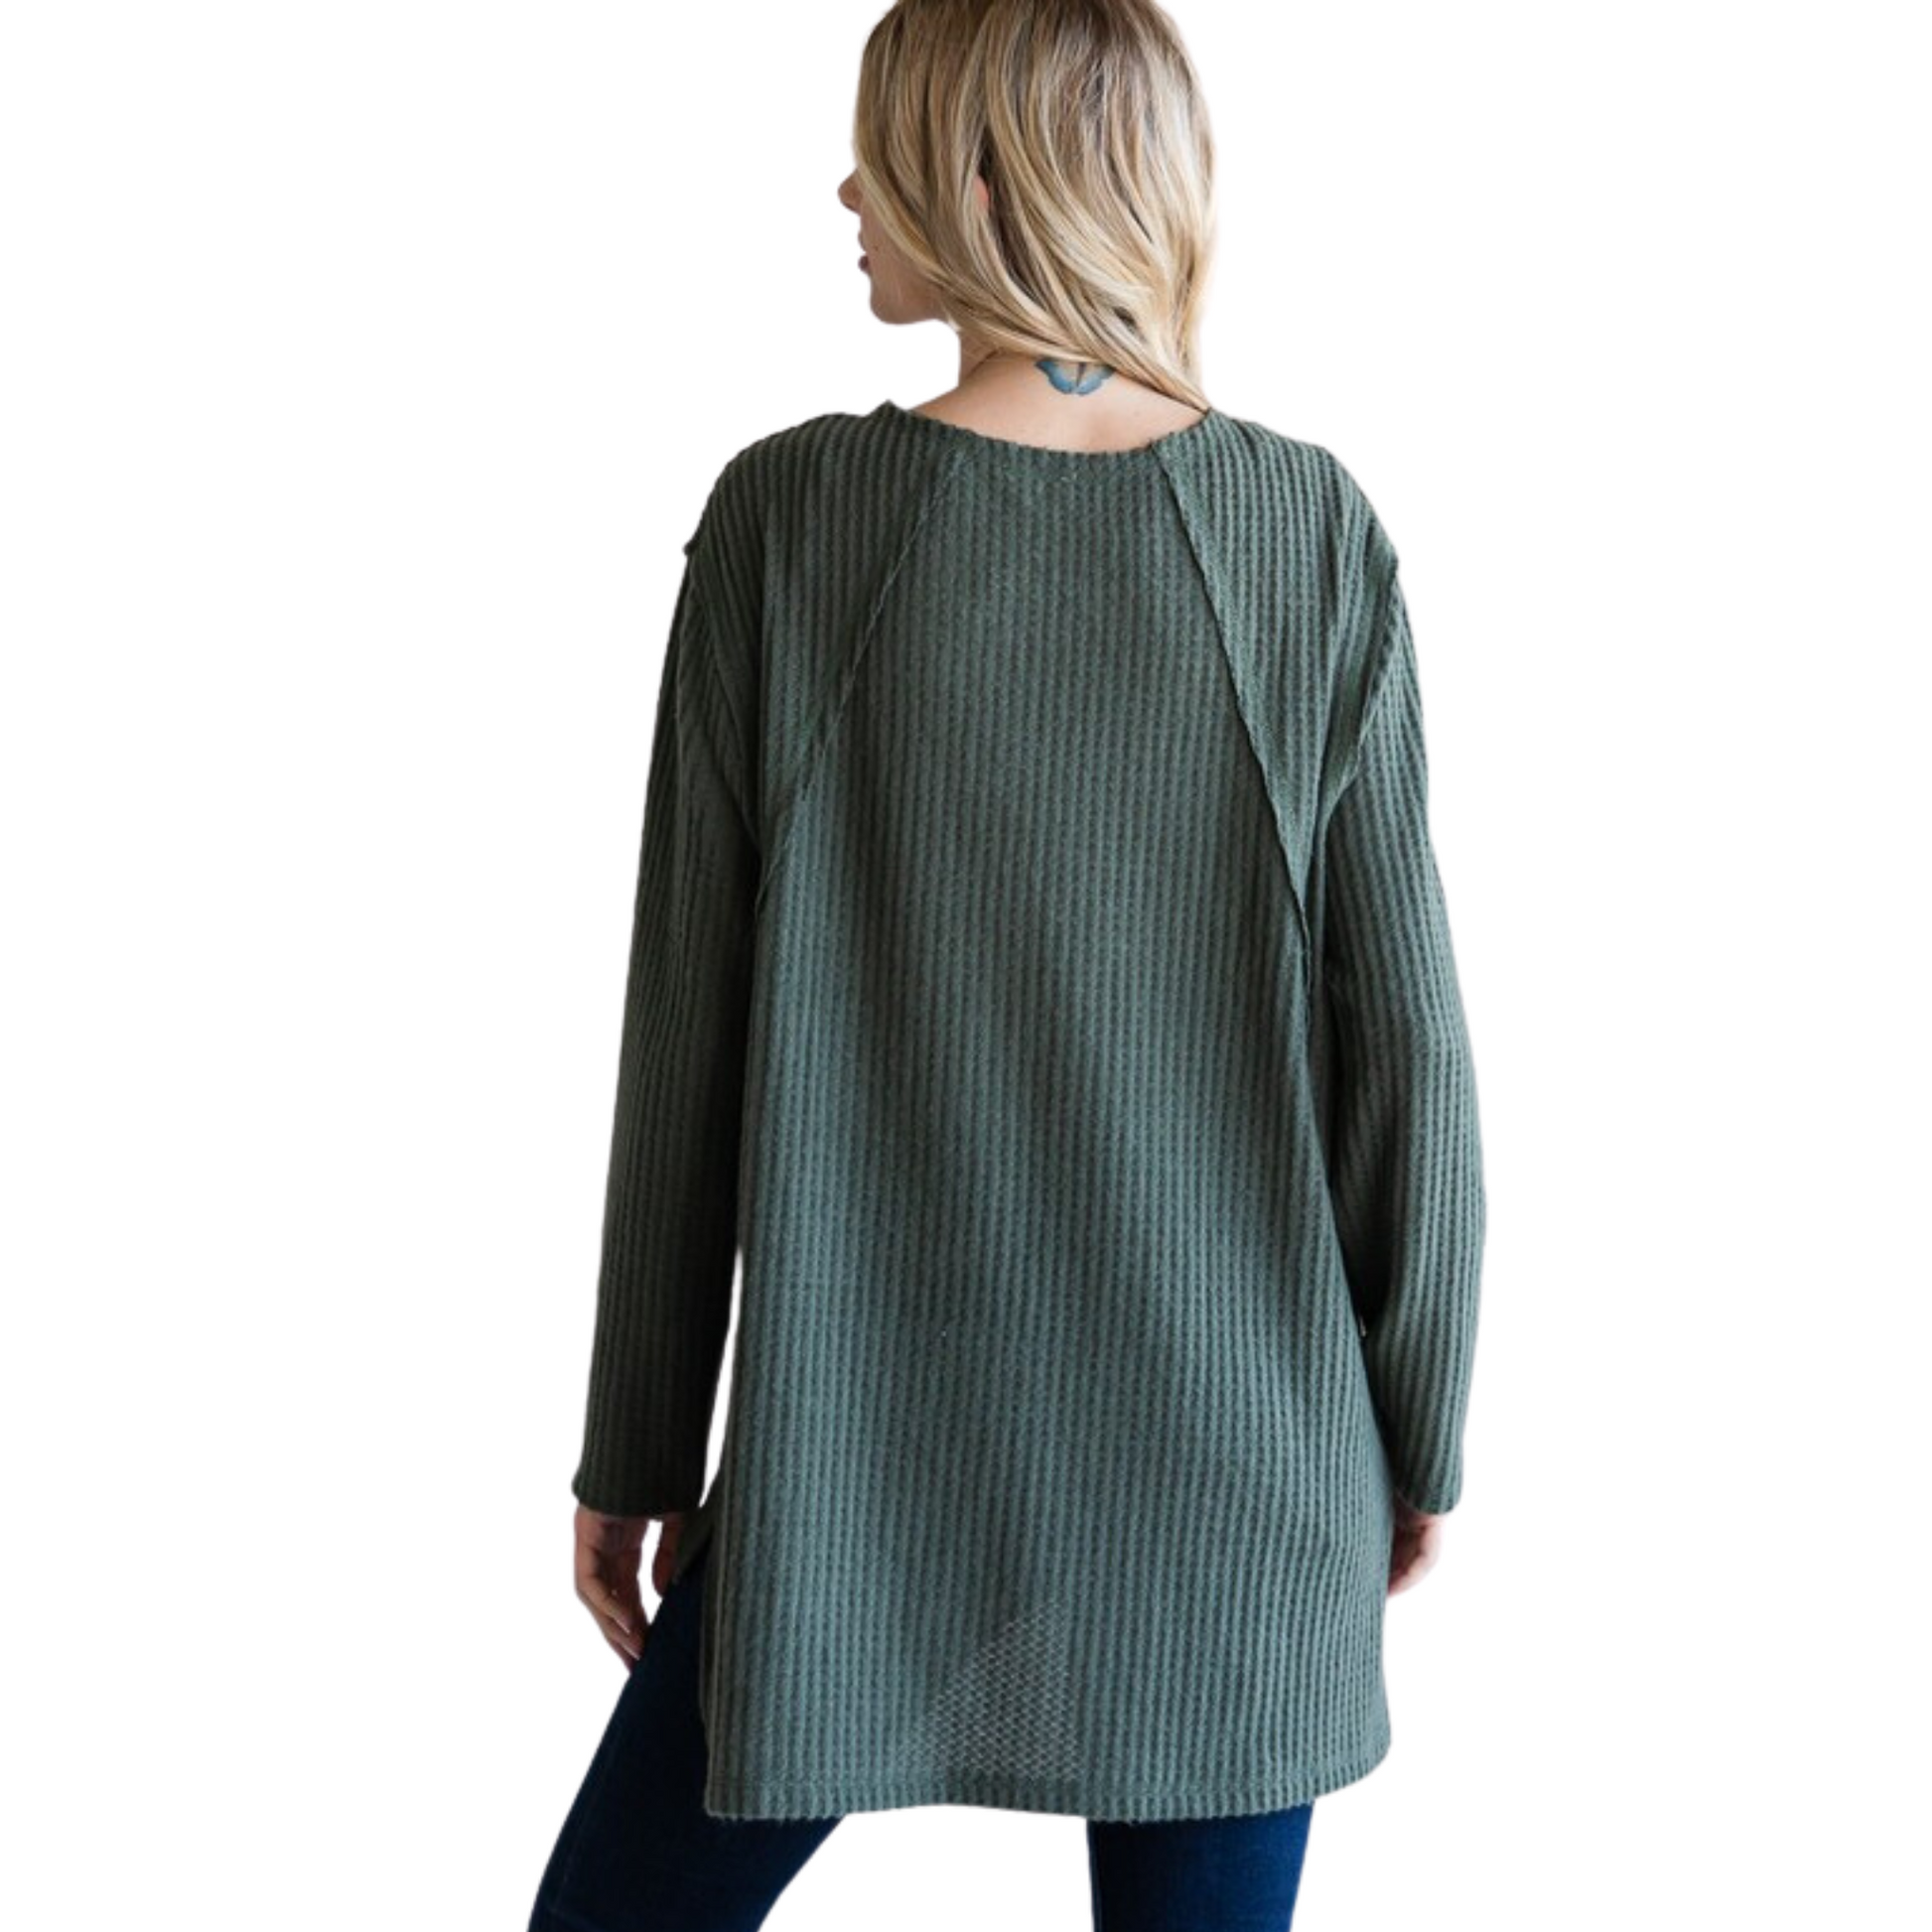 This plus size long sleeve top is made from waffle knit fabric in a hunter green color for superior comfort and style. Enjoy the soft texture of the waffle knit material, perfect for everyday wear.